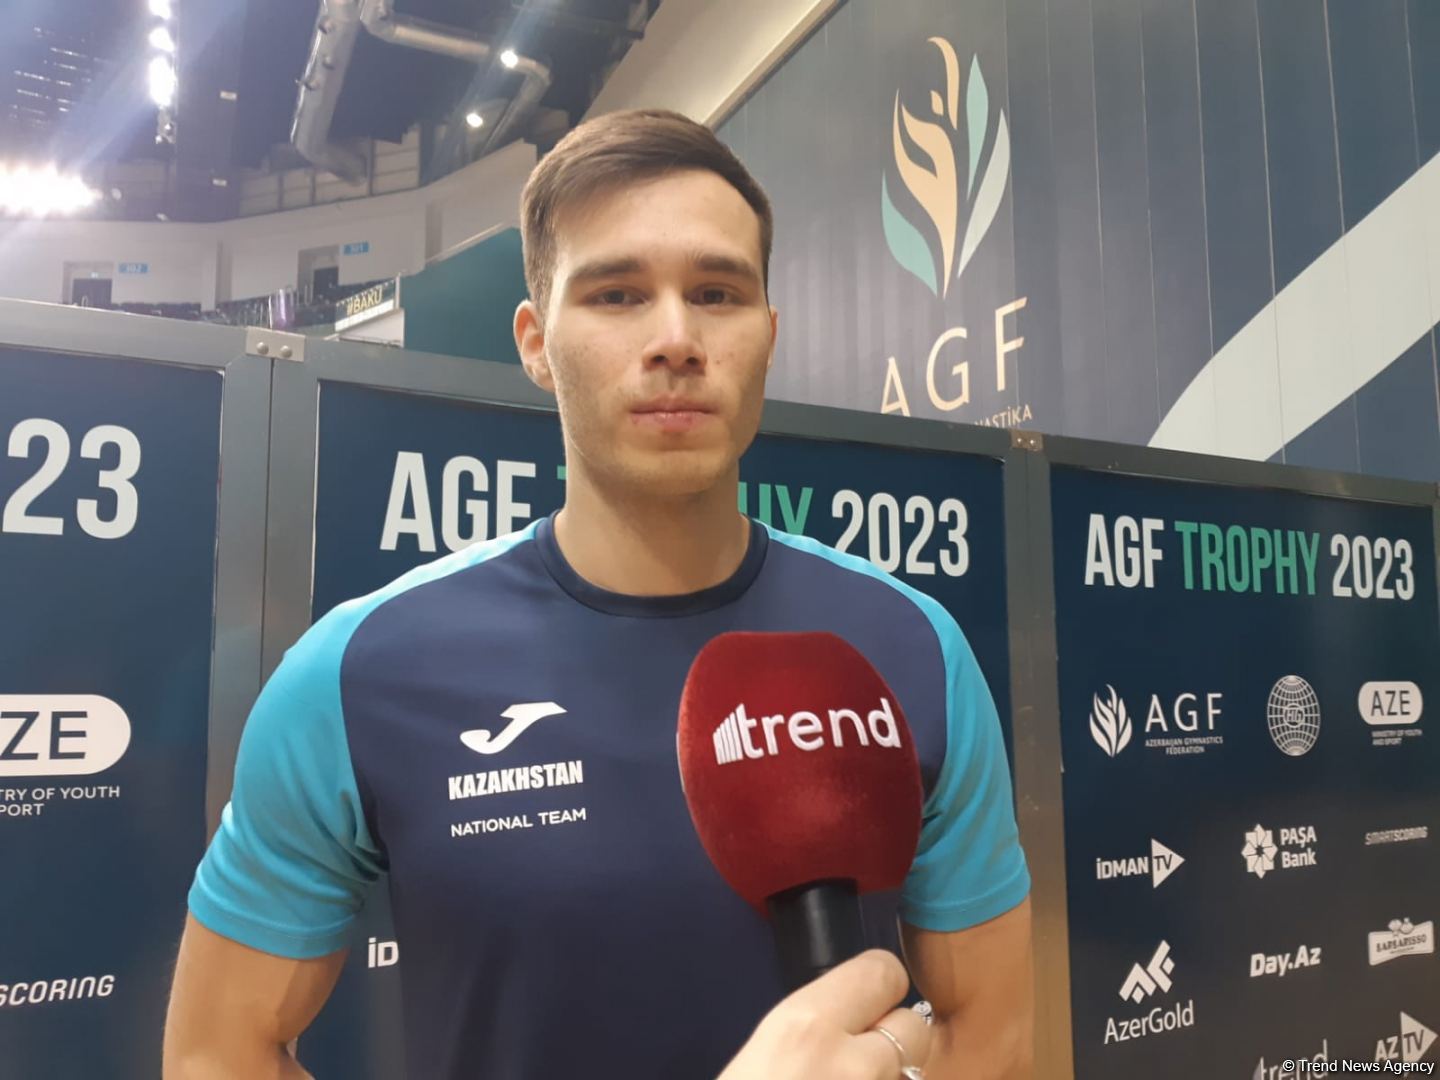 Gymnast from Kazakhstan aiming for gold medal at World Cup in Baku